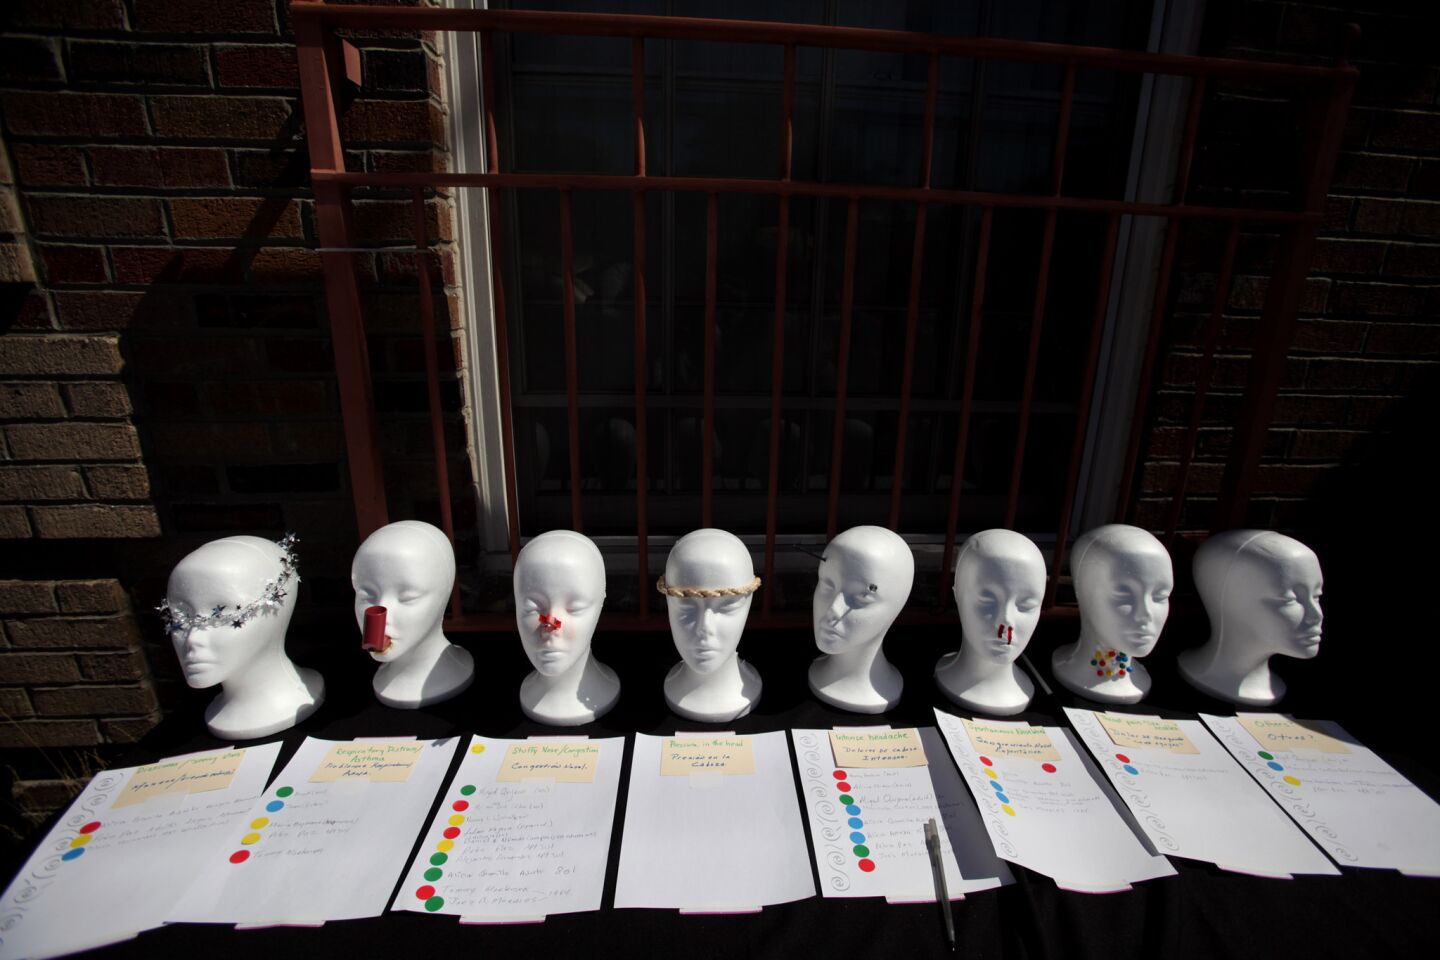 Residents were asked to sign their names on paper next to Styrofoam heads representing the various symptoms they were experiencing in the University Park neighborhood in Los Angeles.